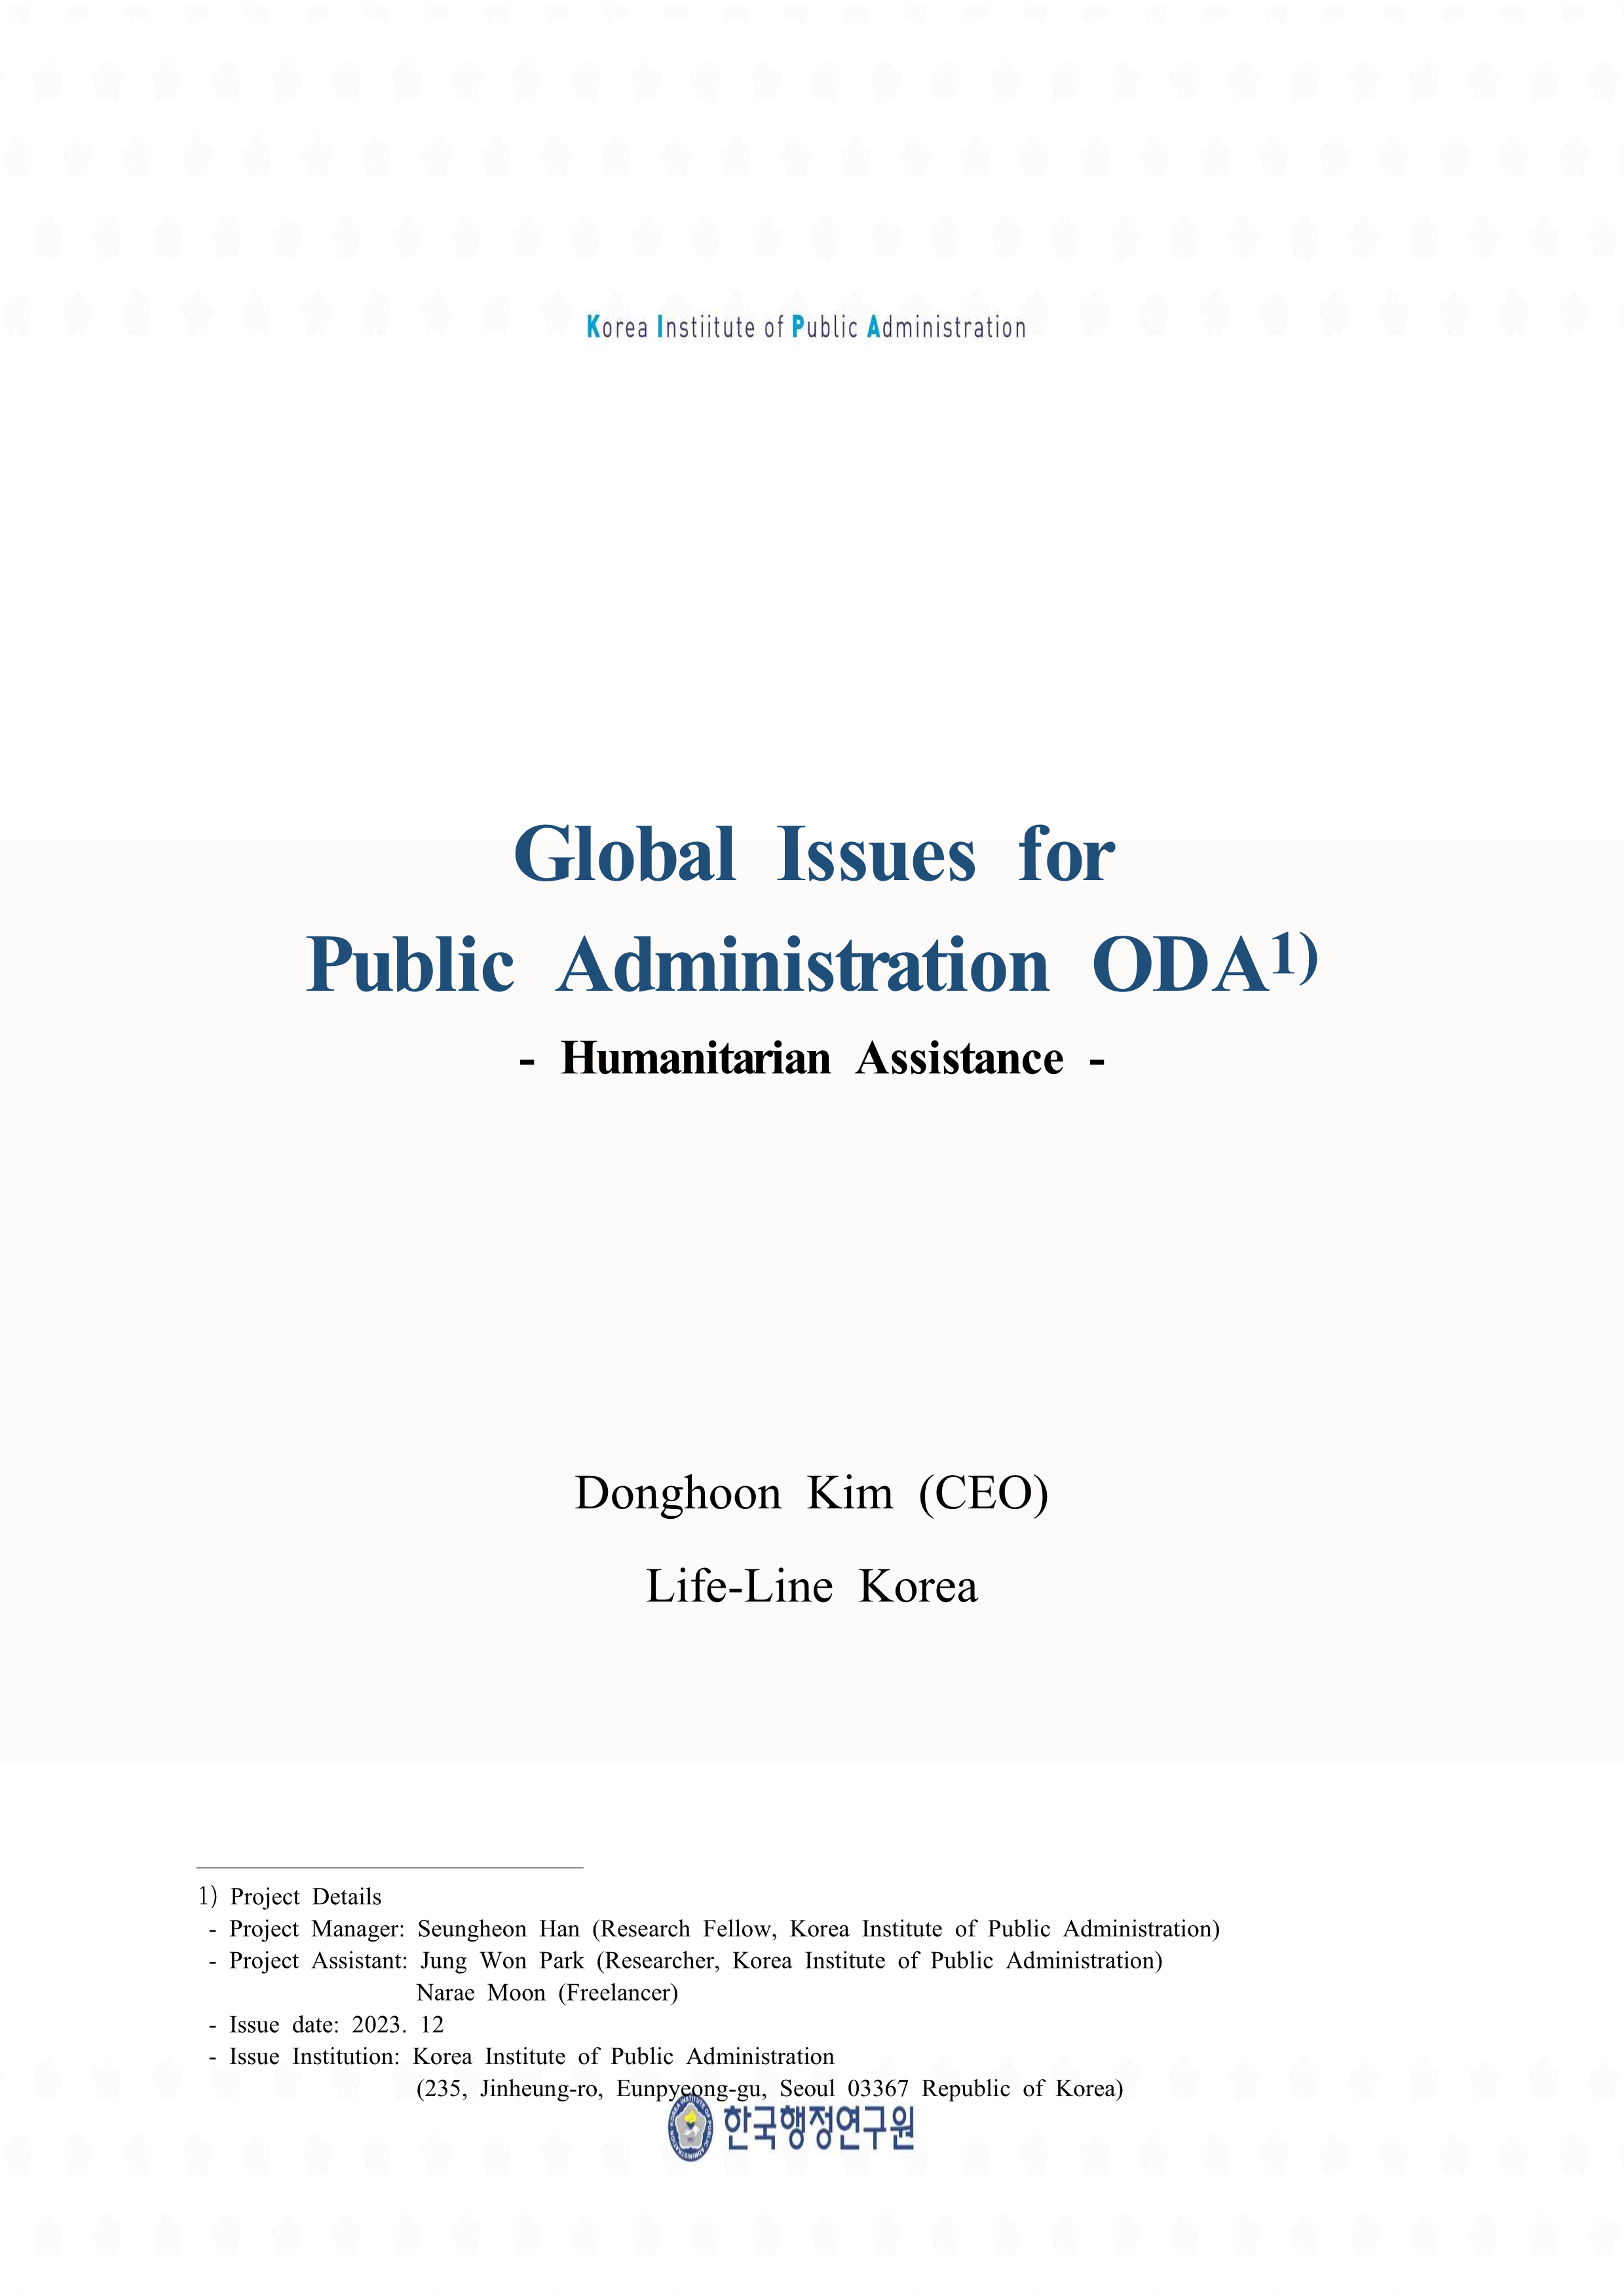 《Global Issues for Public Administration ODA_3-2》 Humanitarian Assistance